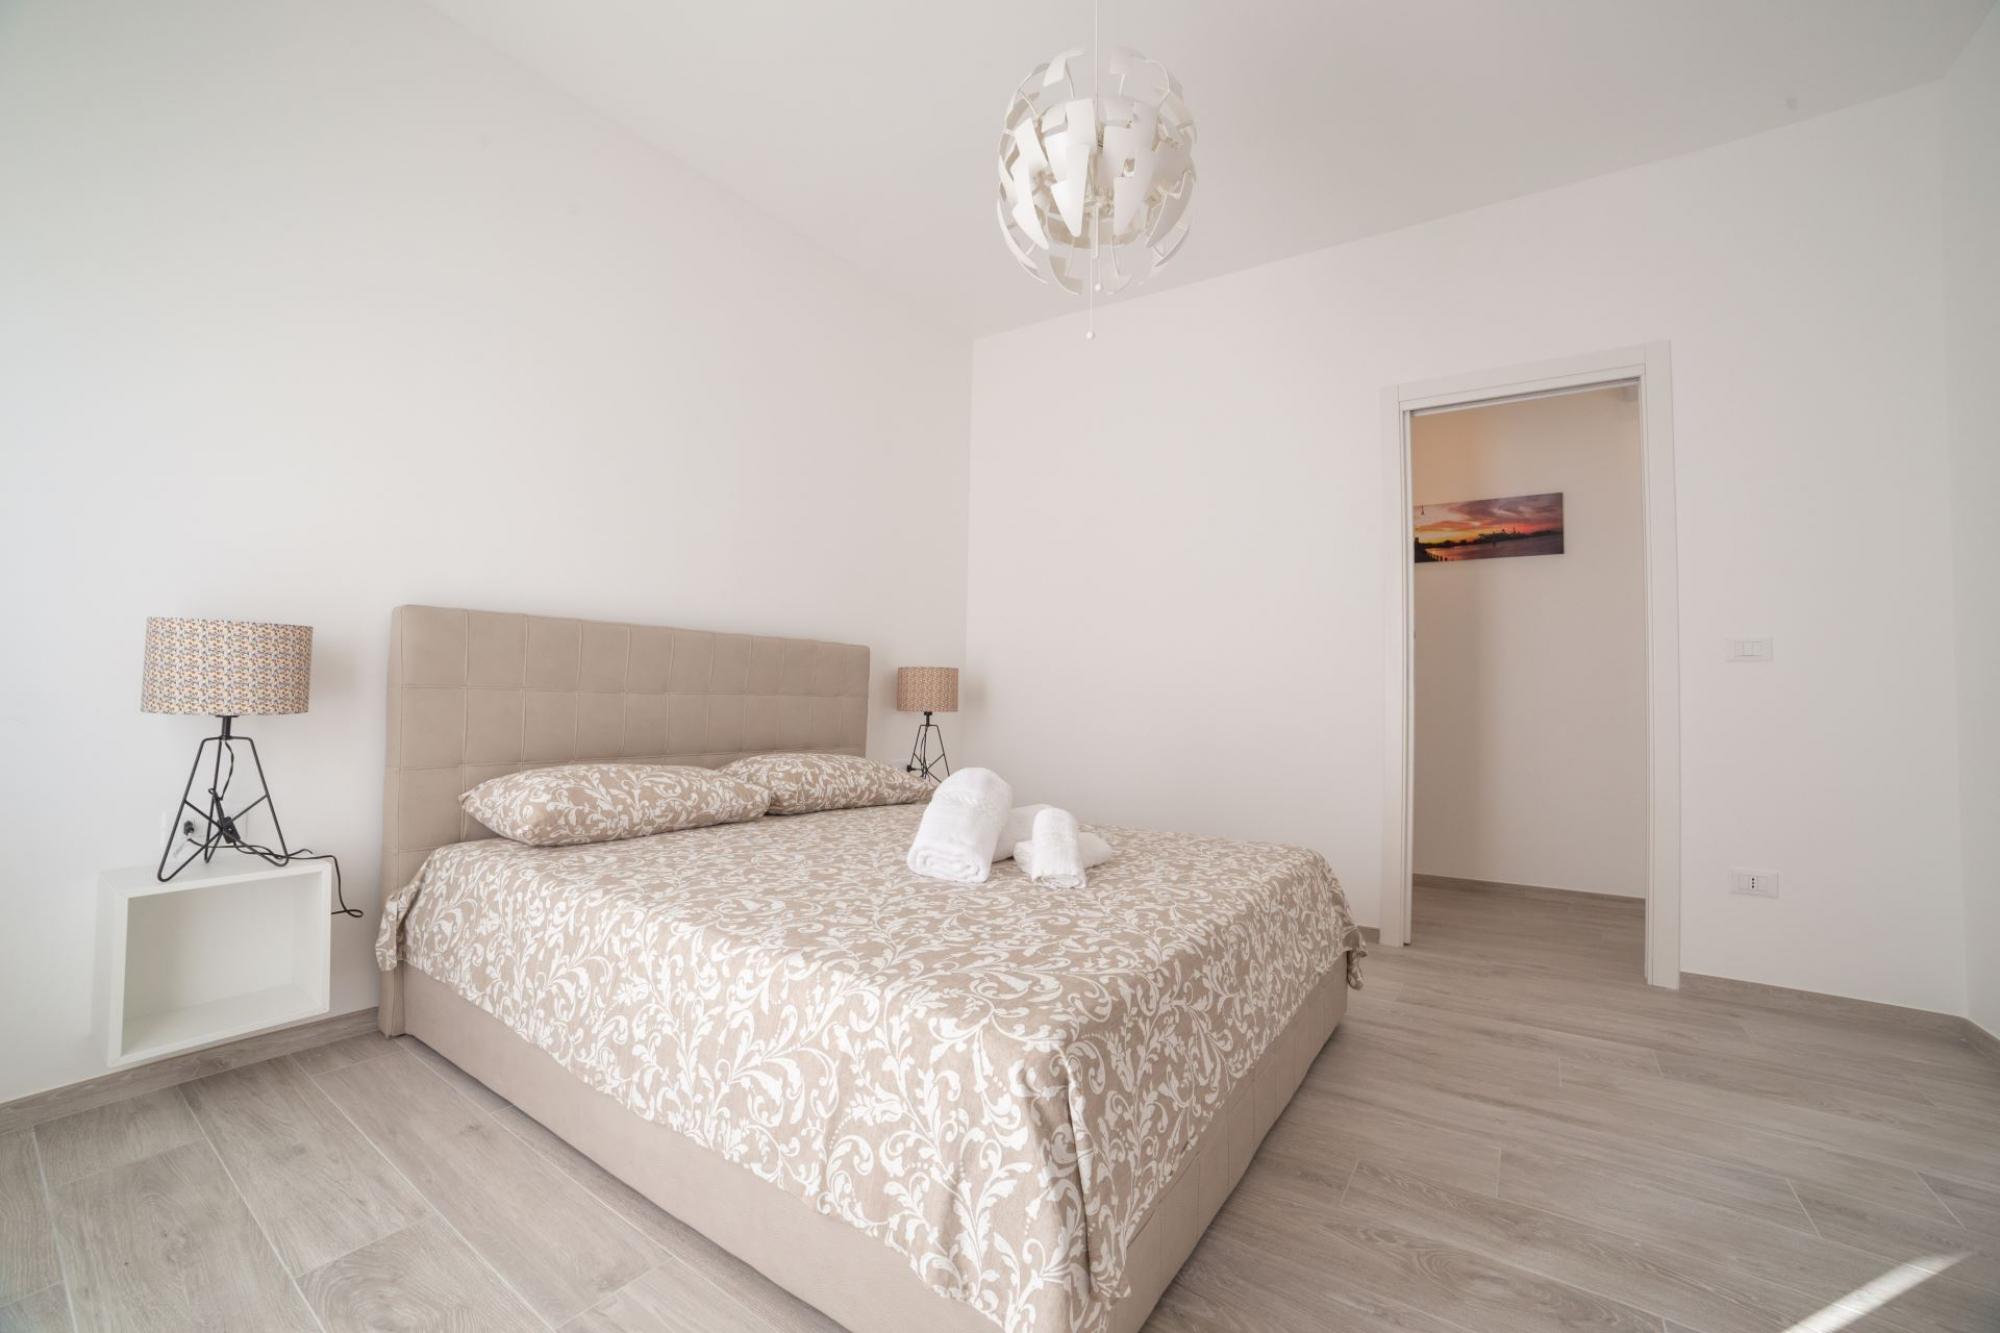 Property Image 2 - 4 persons  1 bathroom  suitable for families  central location  private balcony-Casa Anna by Home080